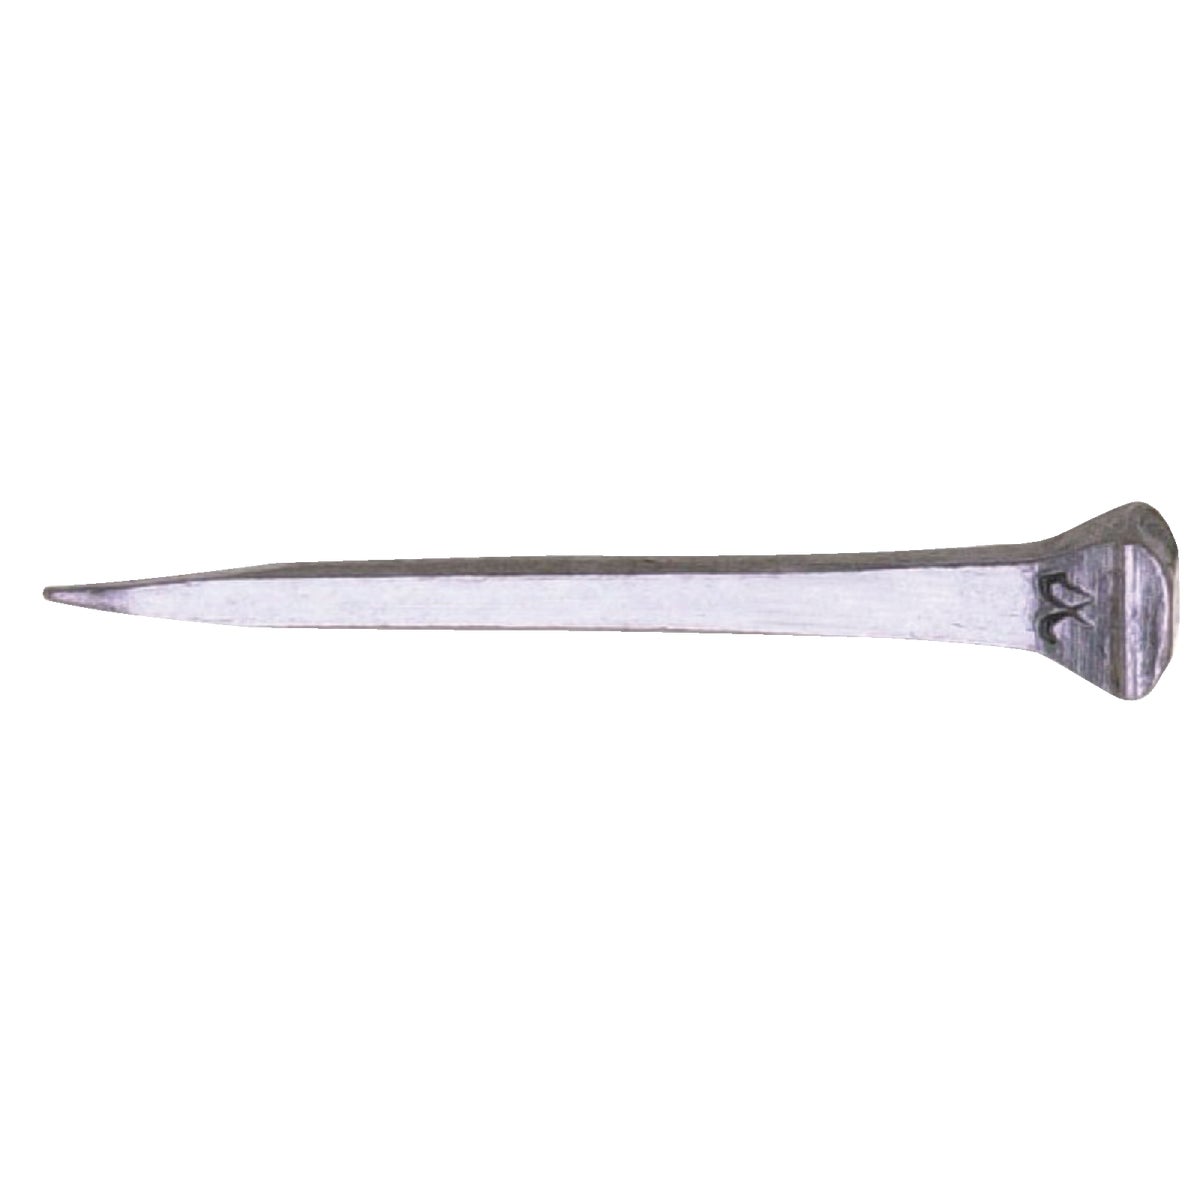 Item 723985, Horseshoe nails made to work in the toughest conditions.